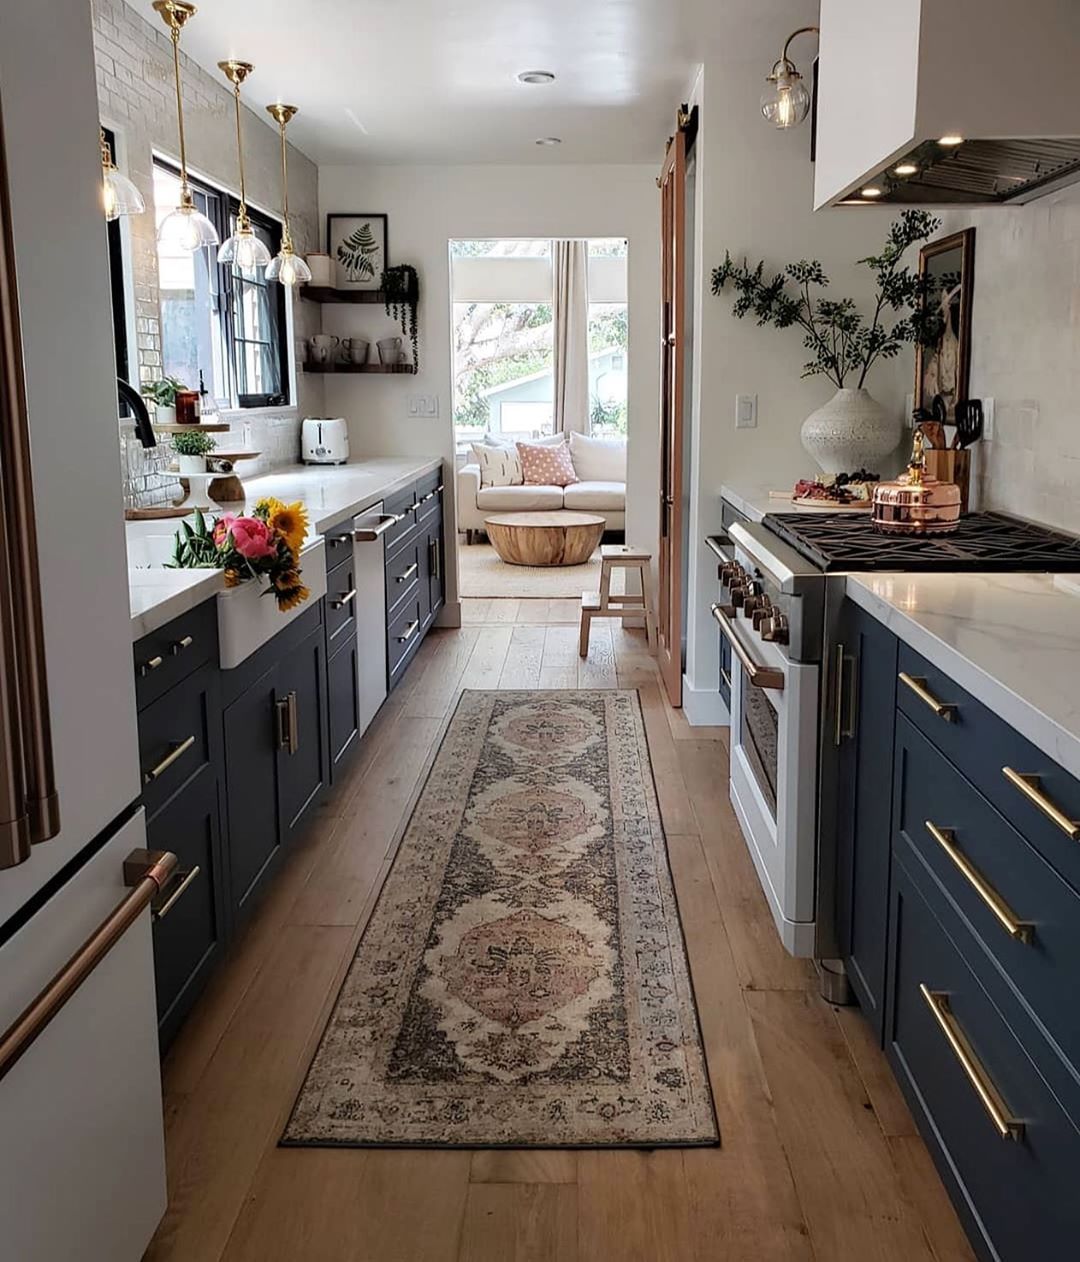 Loloi Rugs on Instagram: “Our latest obsession: this newly remodeled kitchen from @kismet_house. Excited to see the Evie rug for @magnolia by @joannagaines in the…”